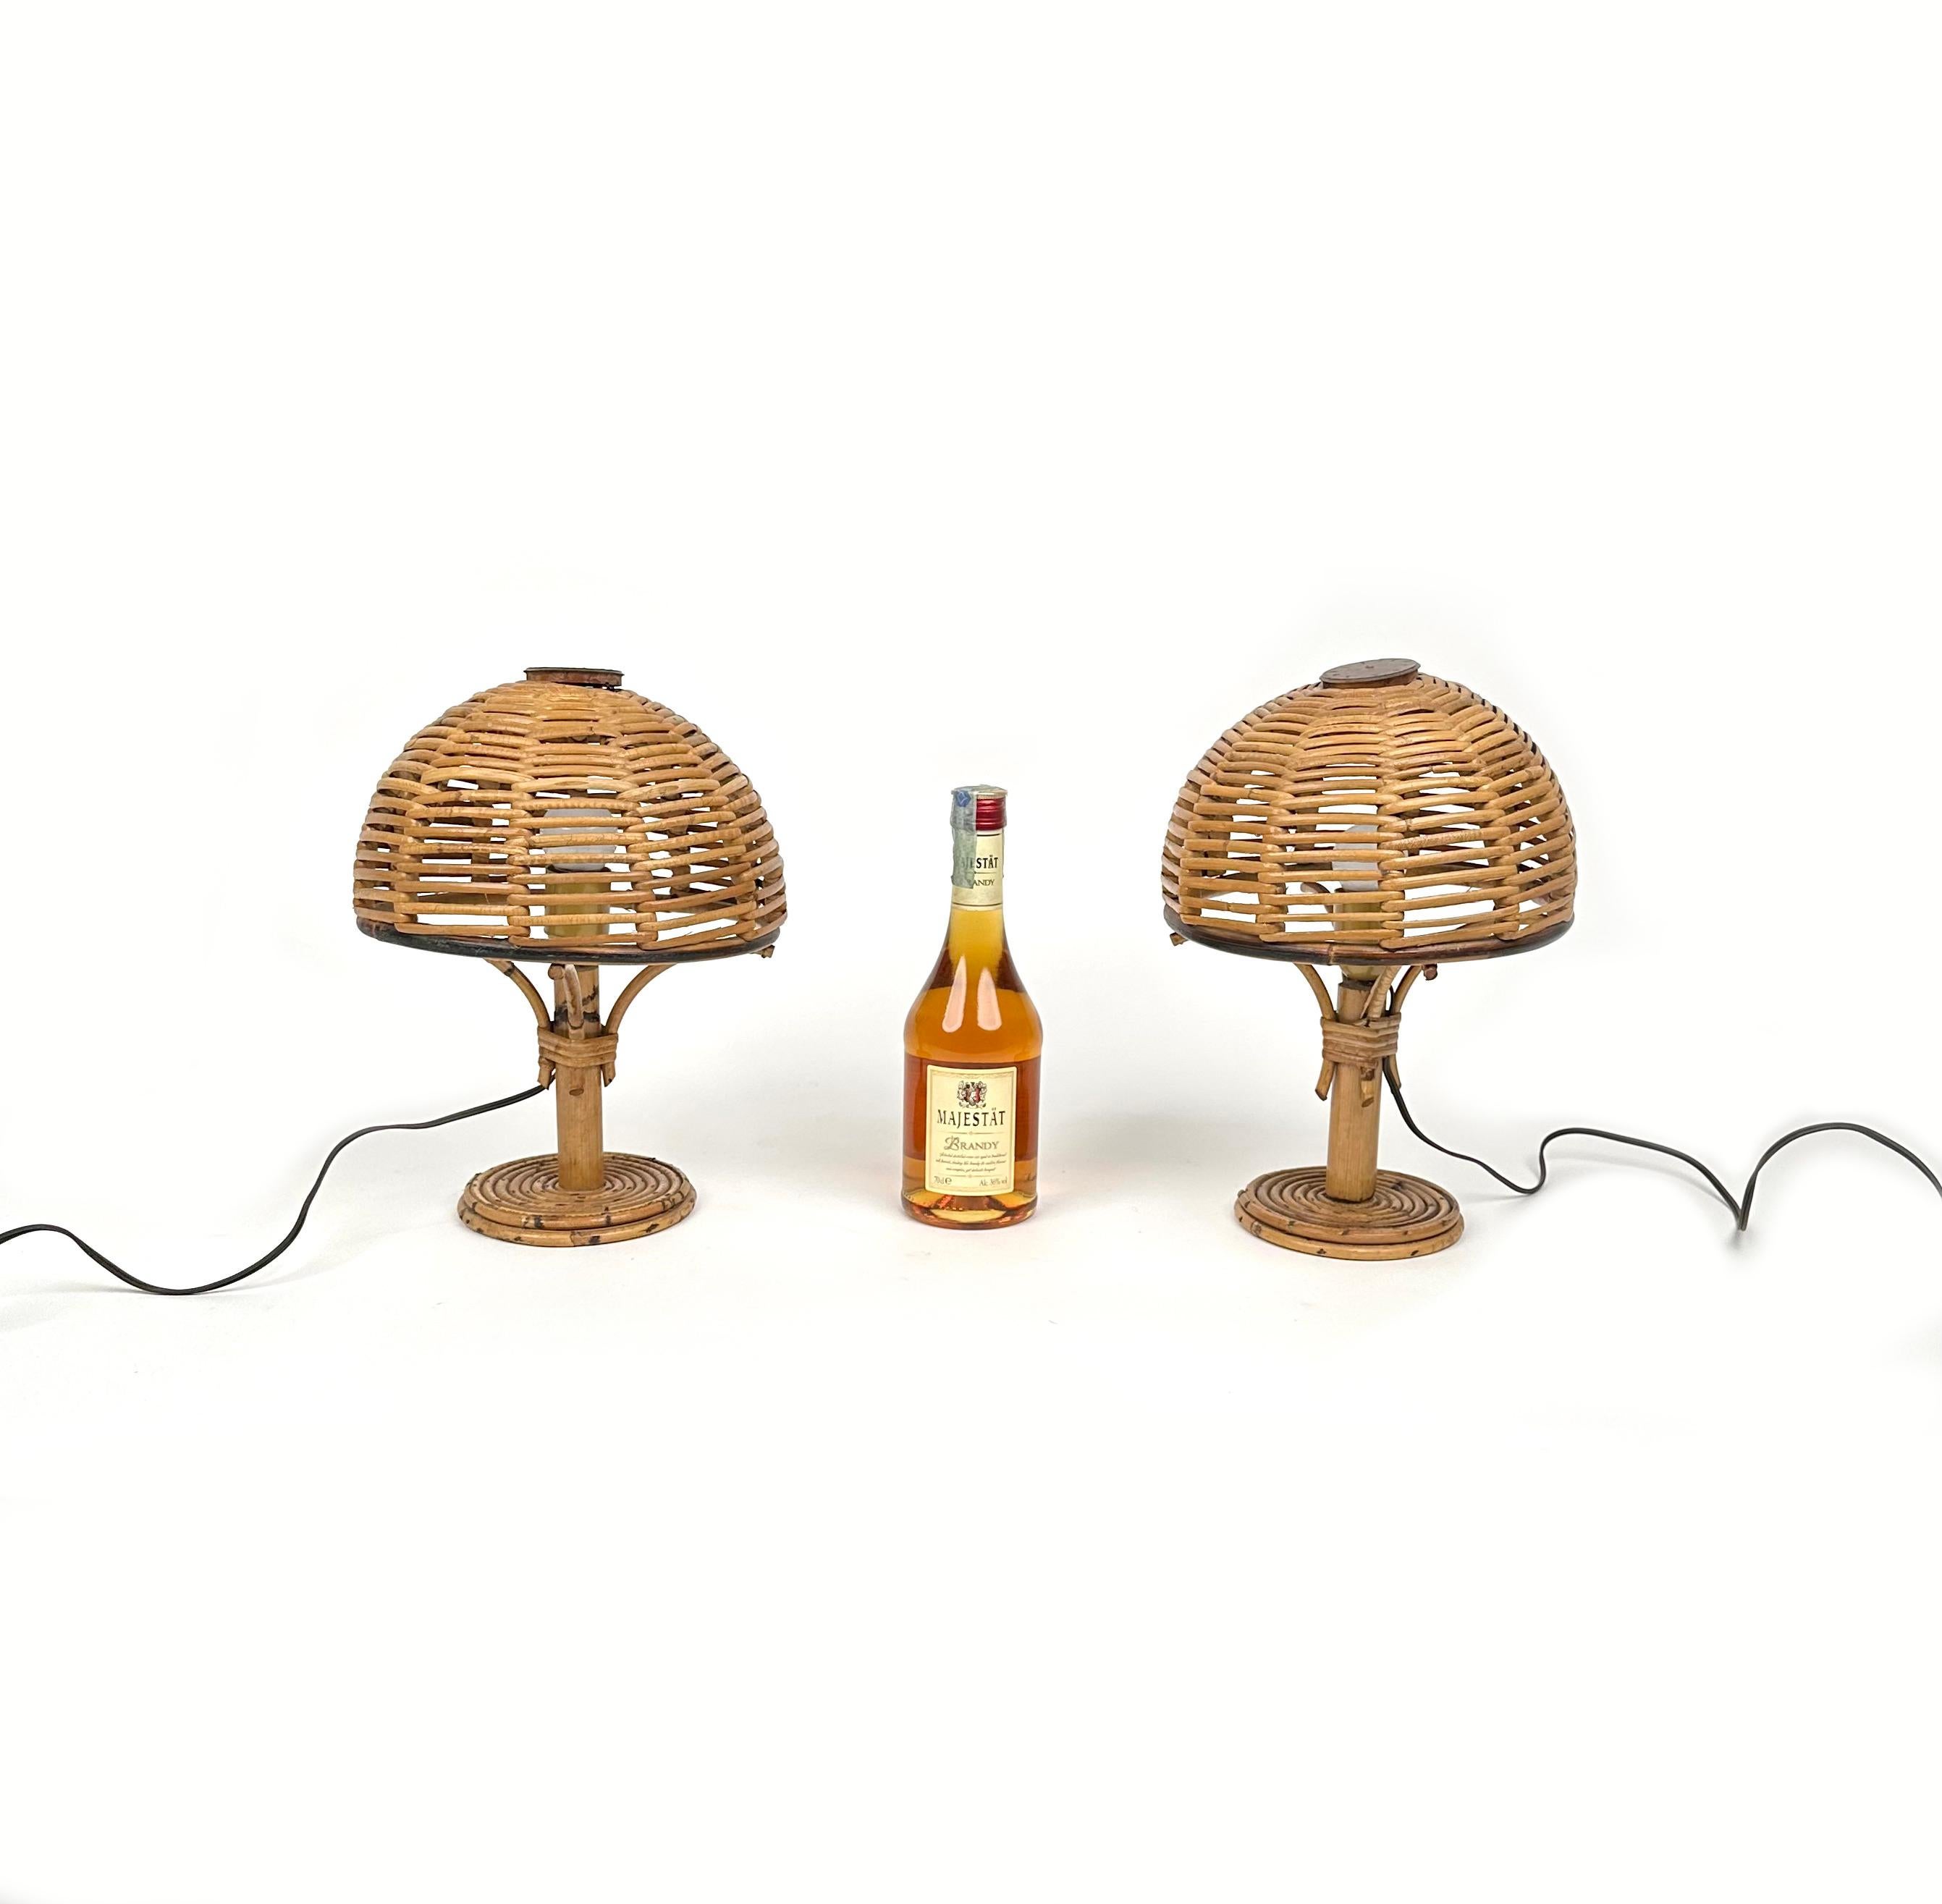 Midcentury Bamboo and Rattan Pair of Table Lamps Louis Sognot Style, Italy 1960s For Sale 2